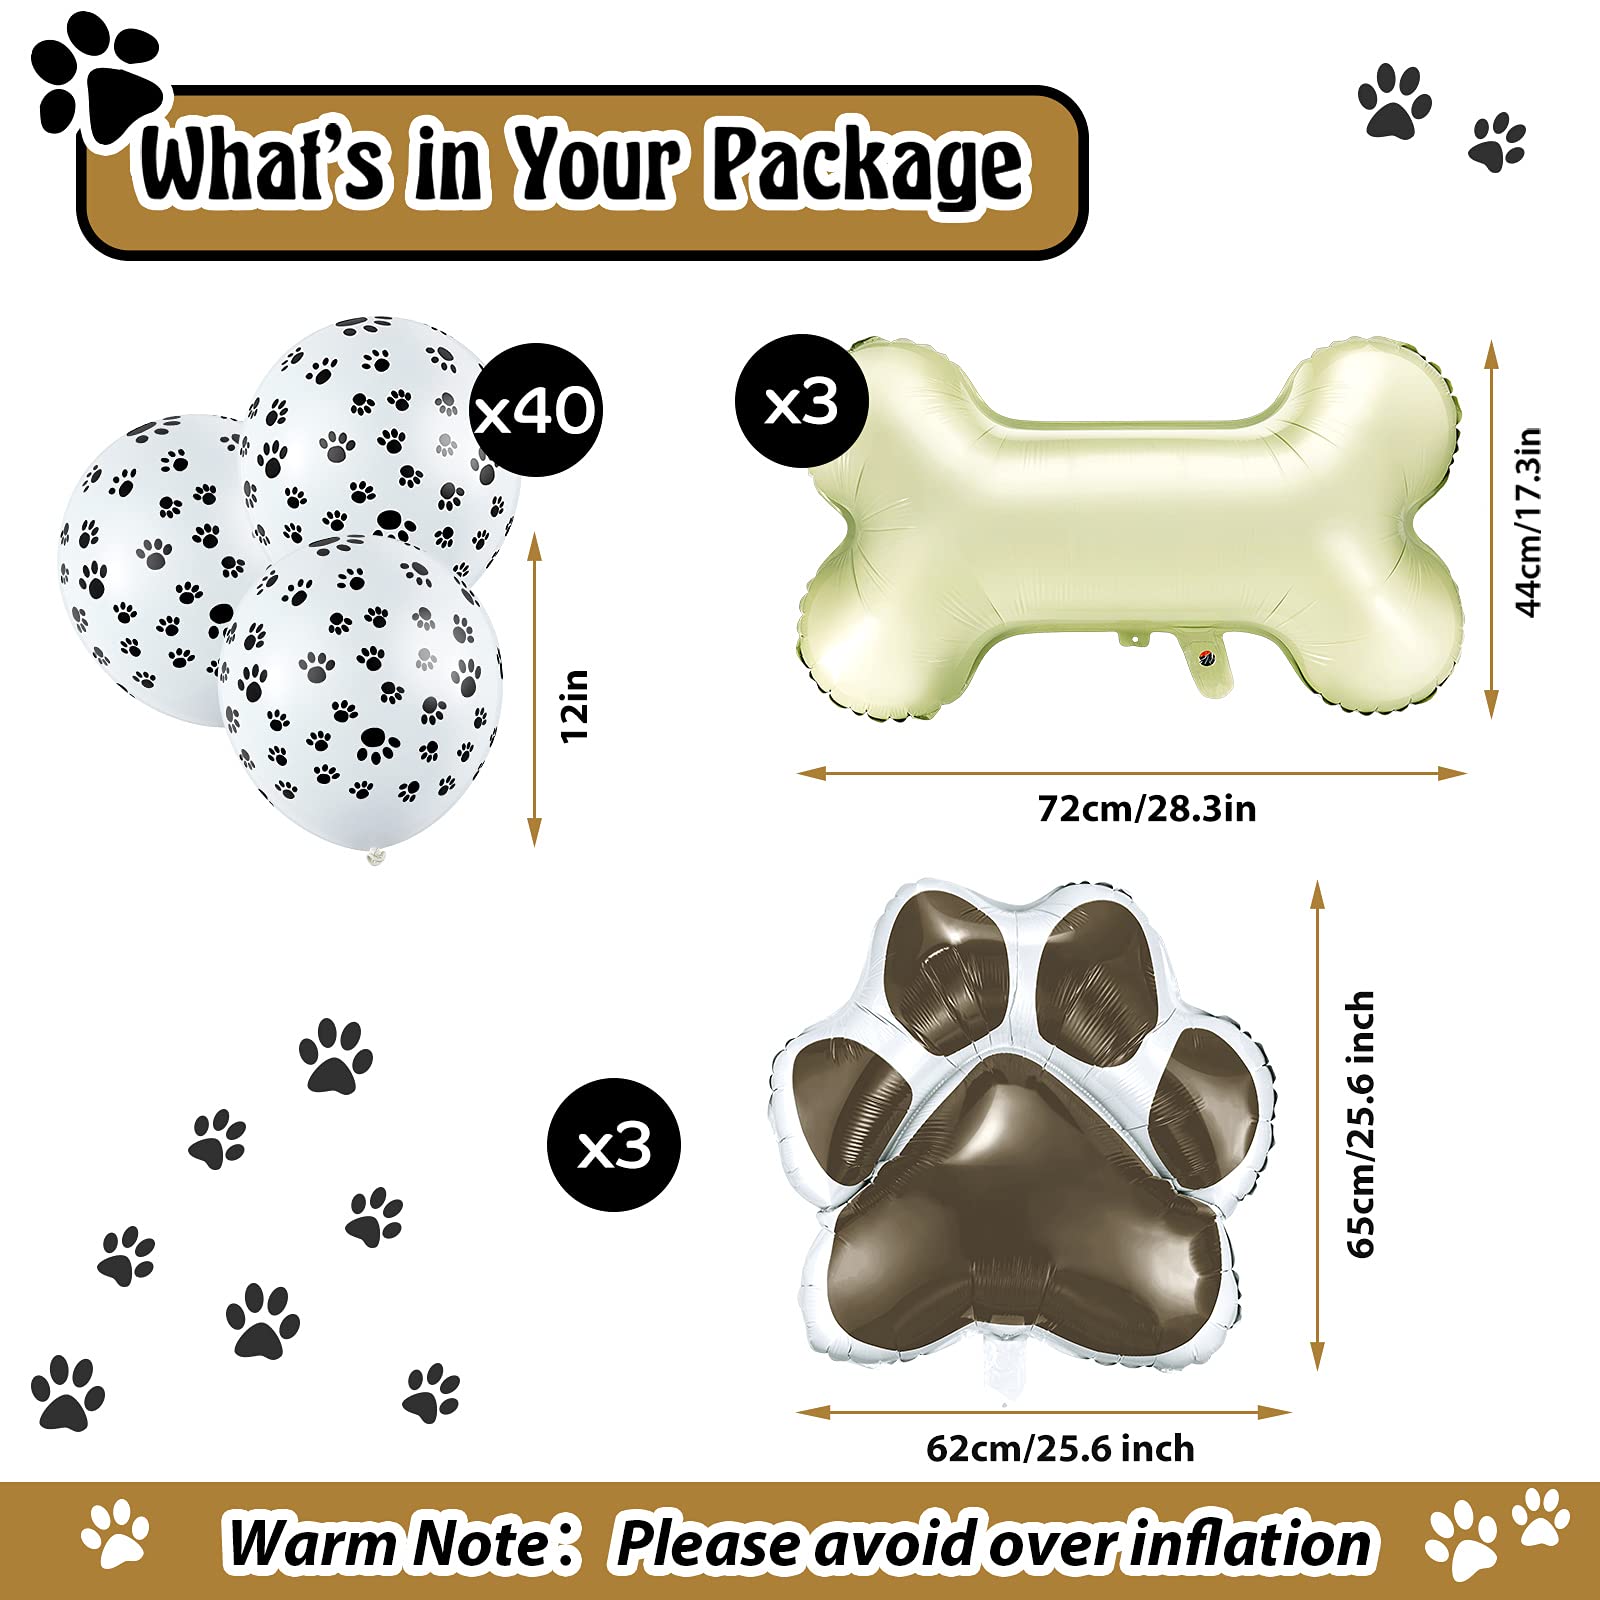 46 Pieces Dog Themed Balloons Include 40 Pieces Dog Paw Print Latex Balloons 3 Pieces Bone Shaped Foil Balloons and 3 Pieces Dog Paw Print Foil Balloons Props for Pets Kids Birthday Party Decorations